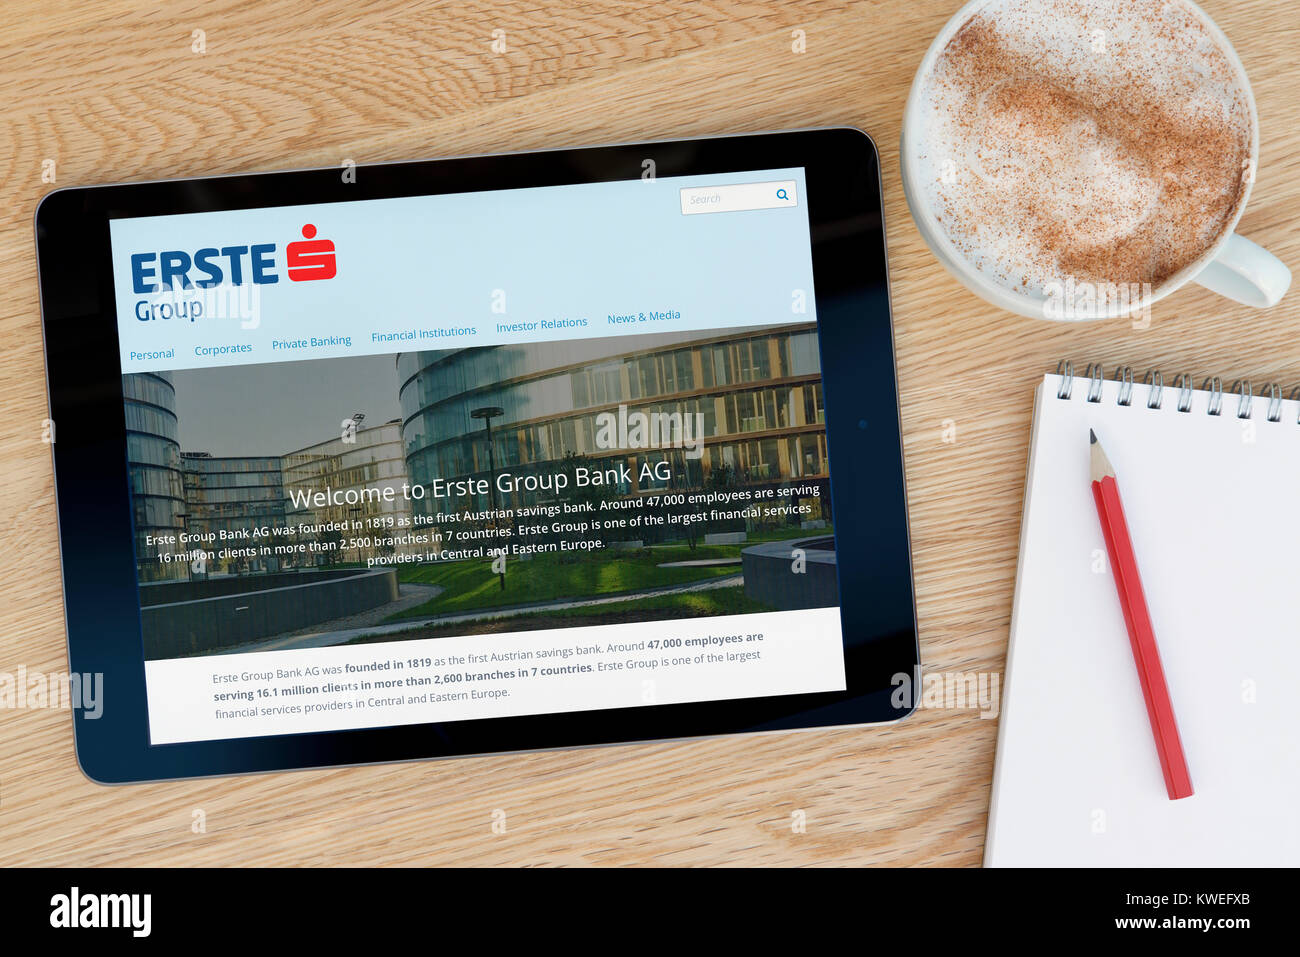 The Erste Group website on an iPad tablet device, resting on a wooden table beside a notepad, pencil and cup of coffee (Editorial only) Stock Photo